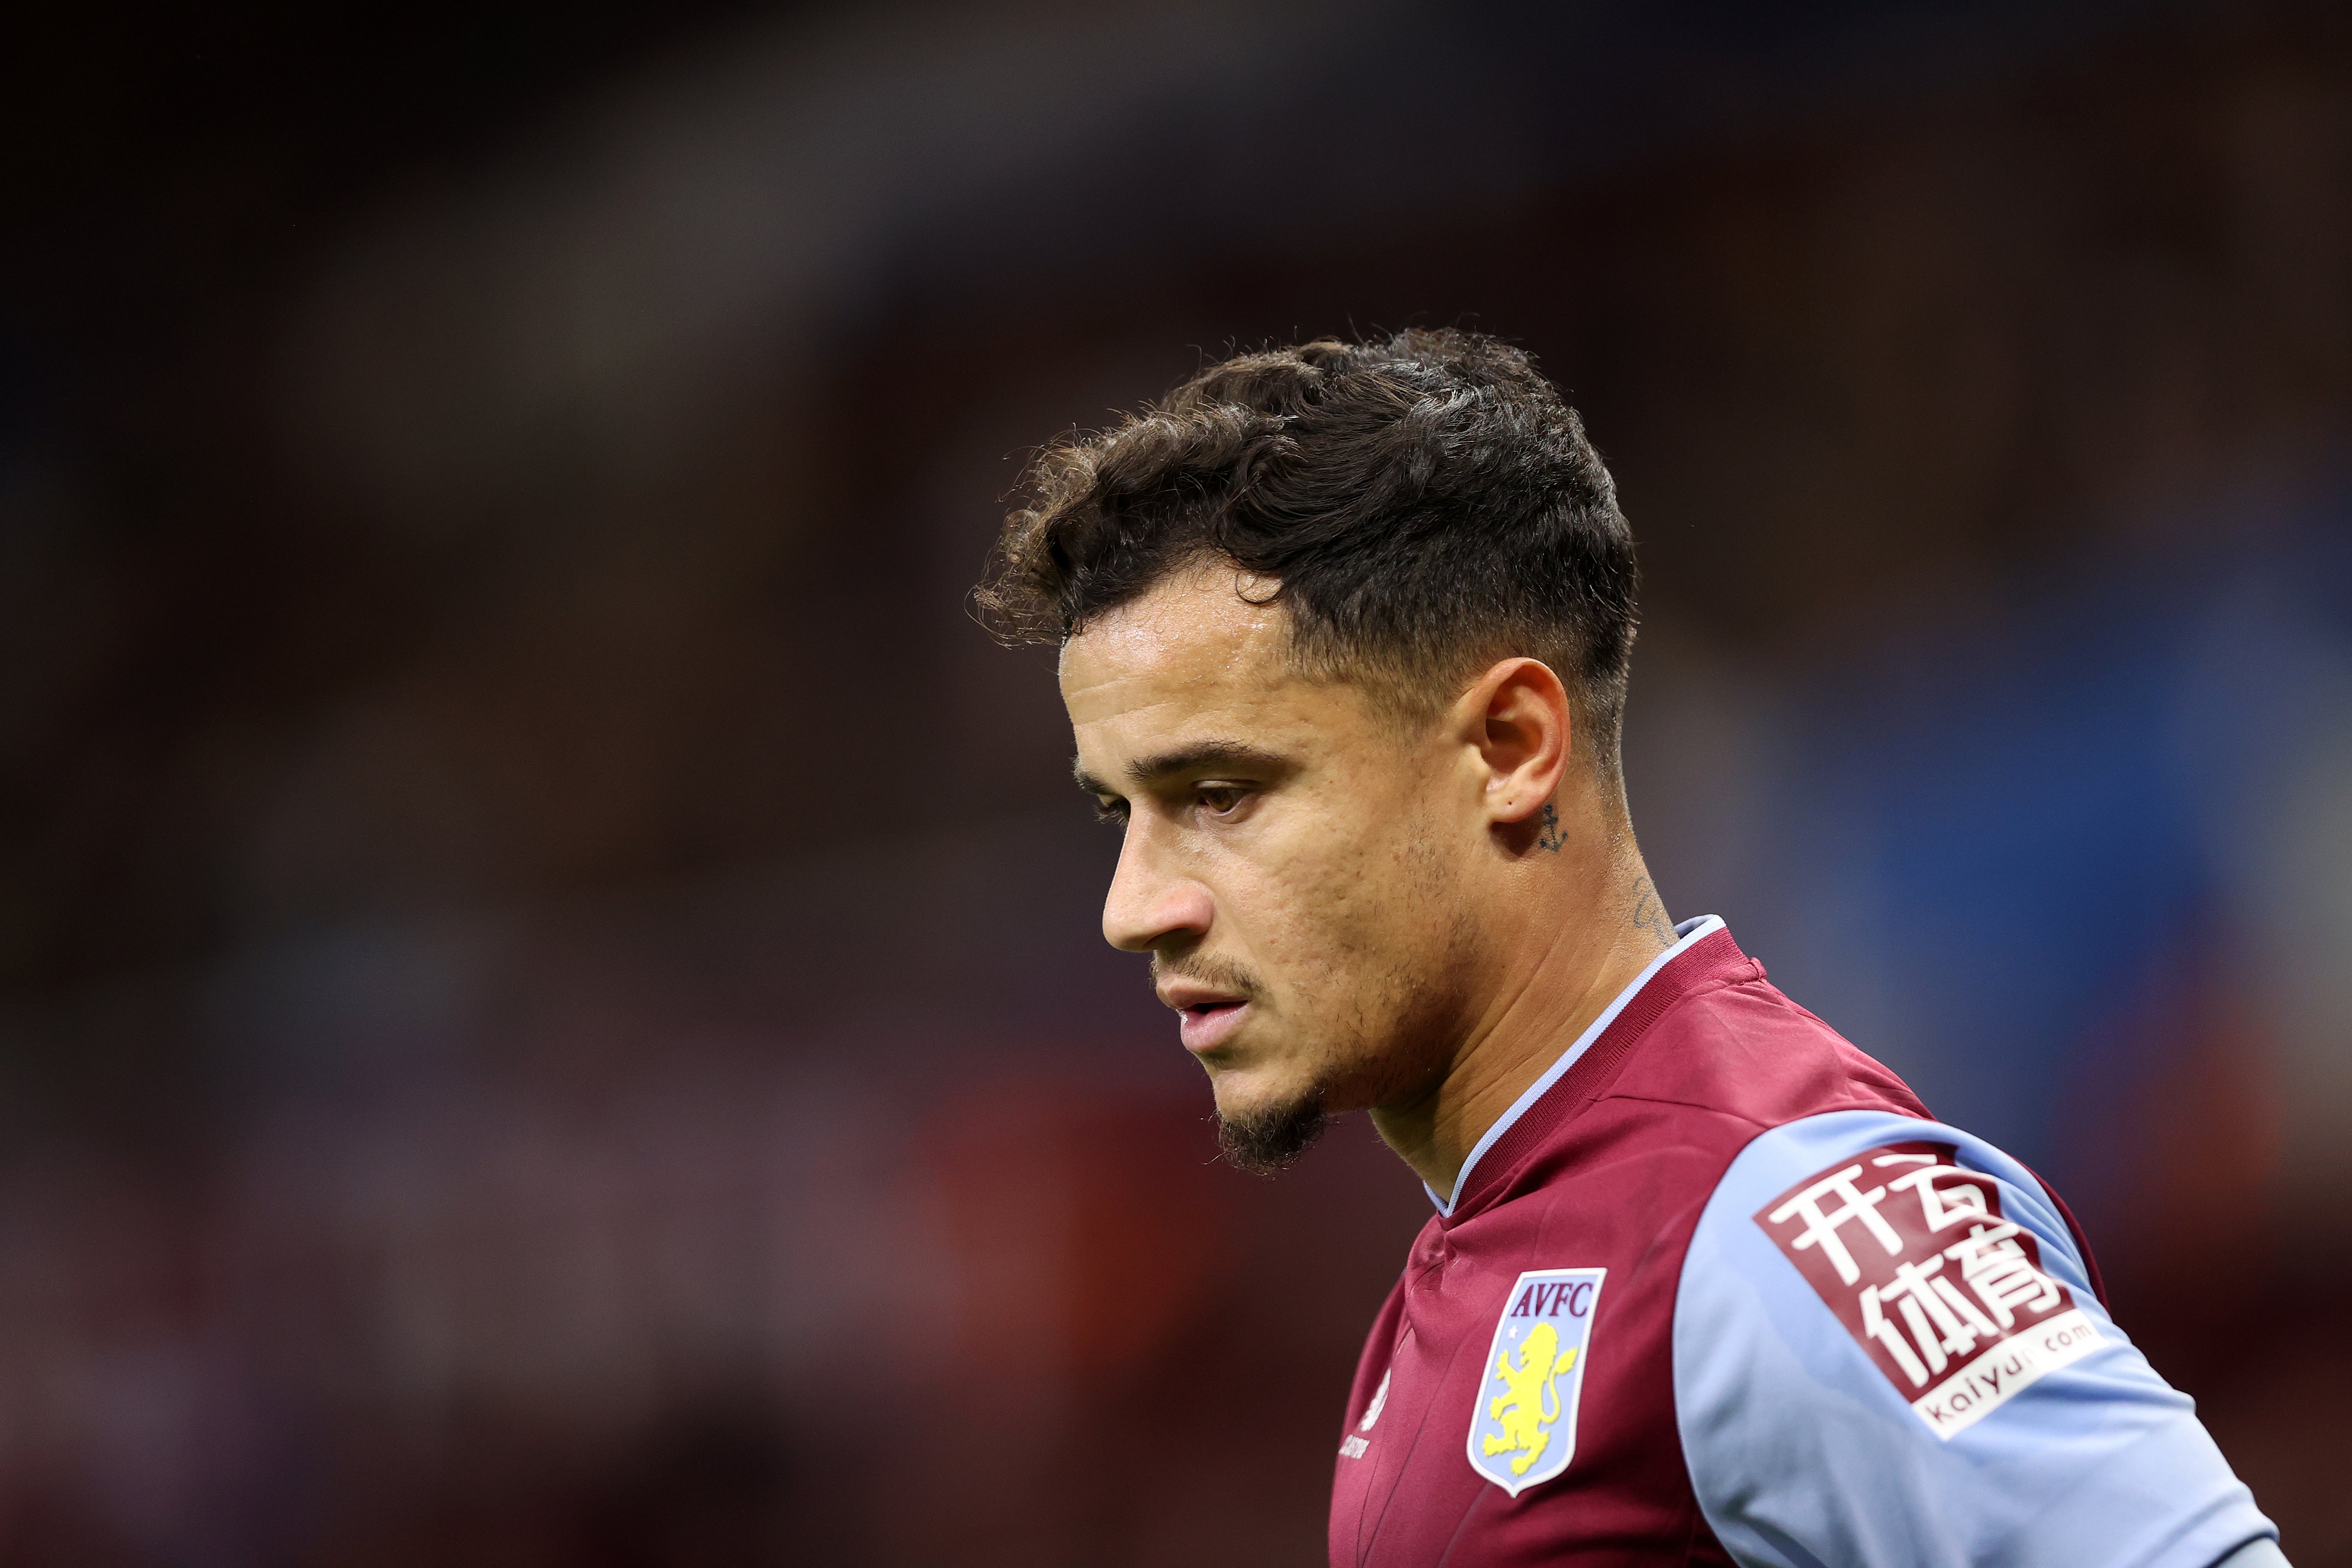 Philippe Coutinho joined Aston Villa permanently in May